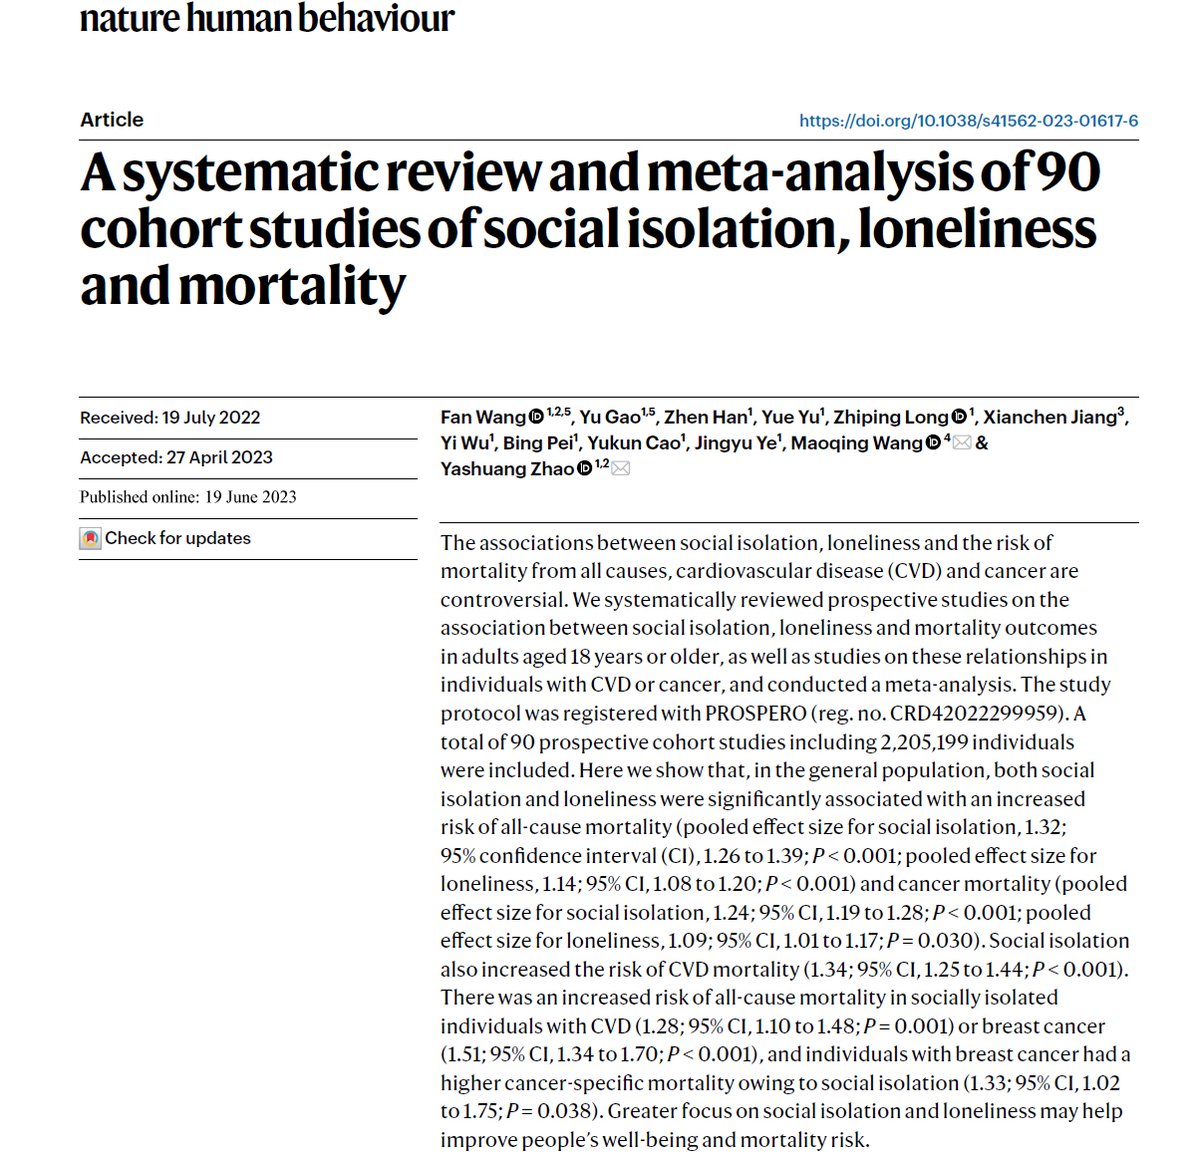 Loneliness doesn't only hurt mental health. It's also a risk factor for physical health. 90 studies, 2.2M people: loneliness and social isolation predict mortality from cancer and all causes, even after controlling for health conditions. Human connection is vital to well-being.